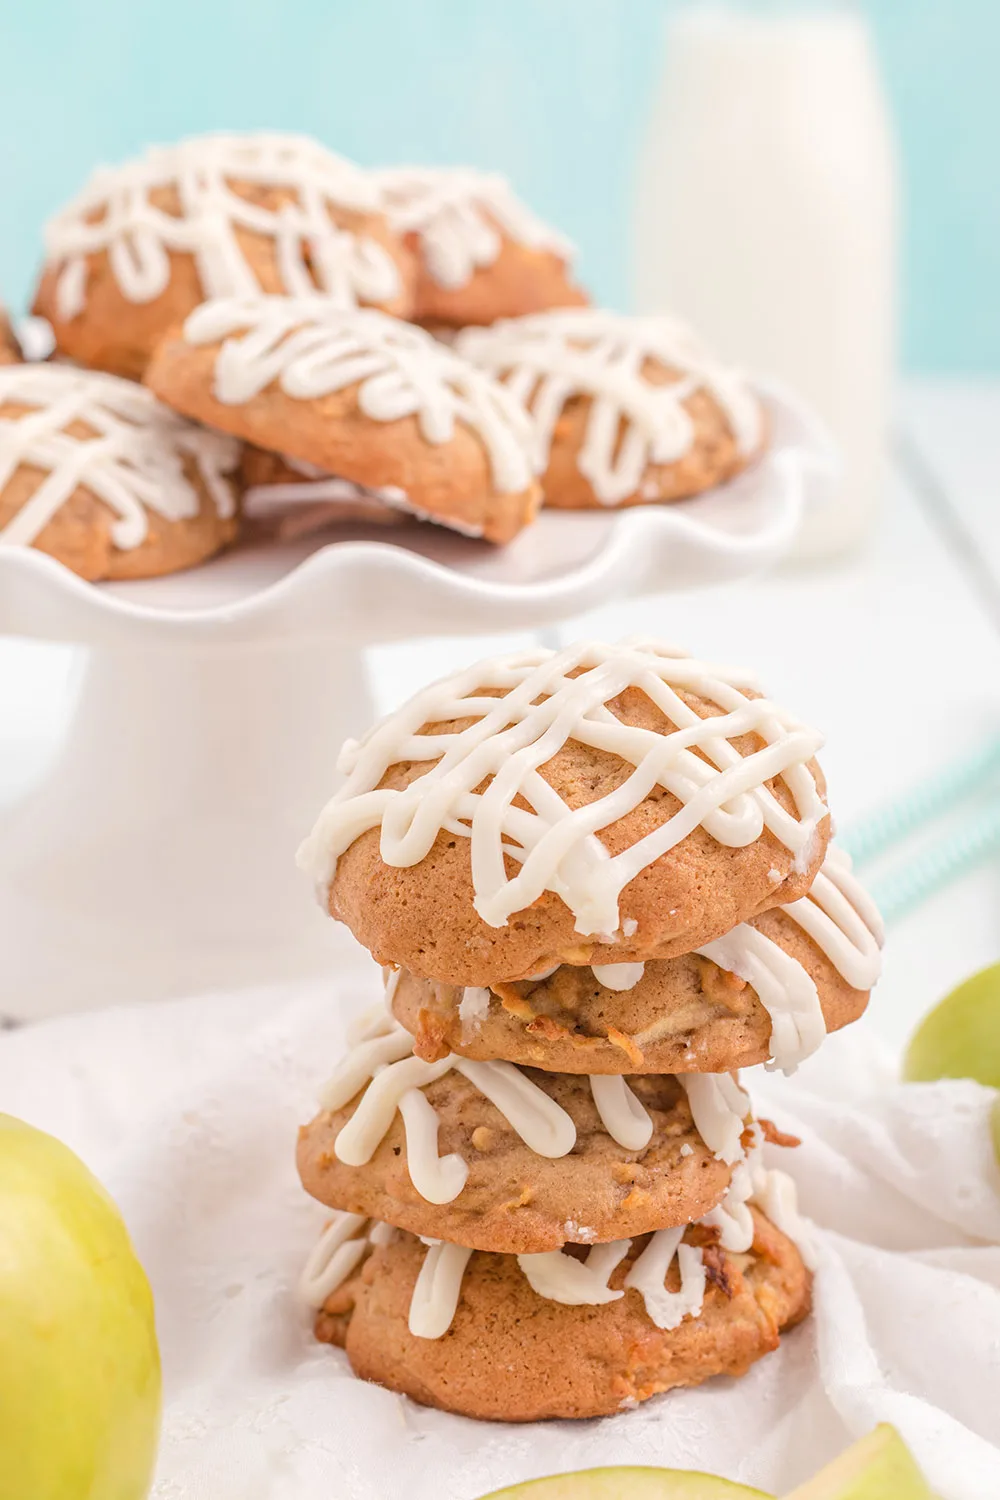 Cookies in a stack and on a tray with milk and apples.